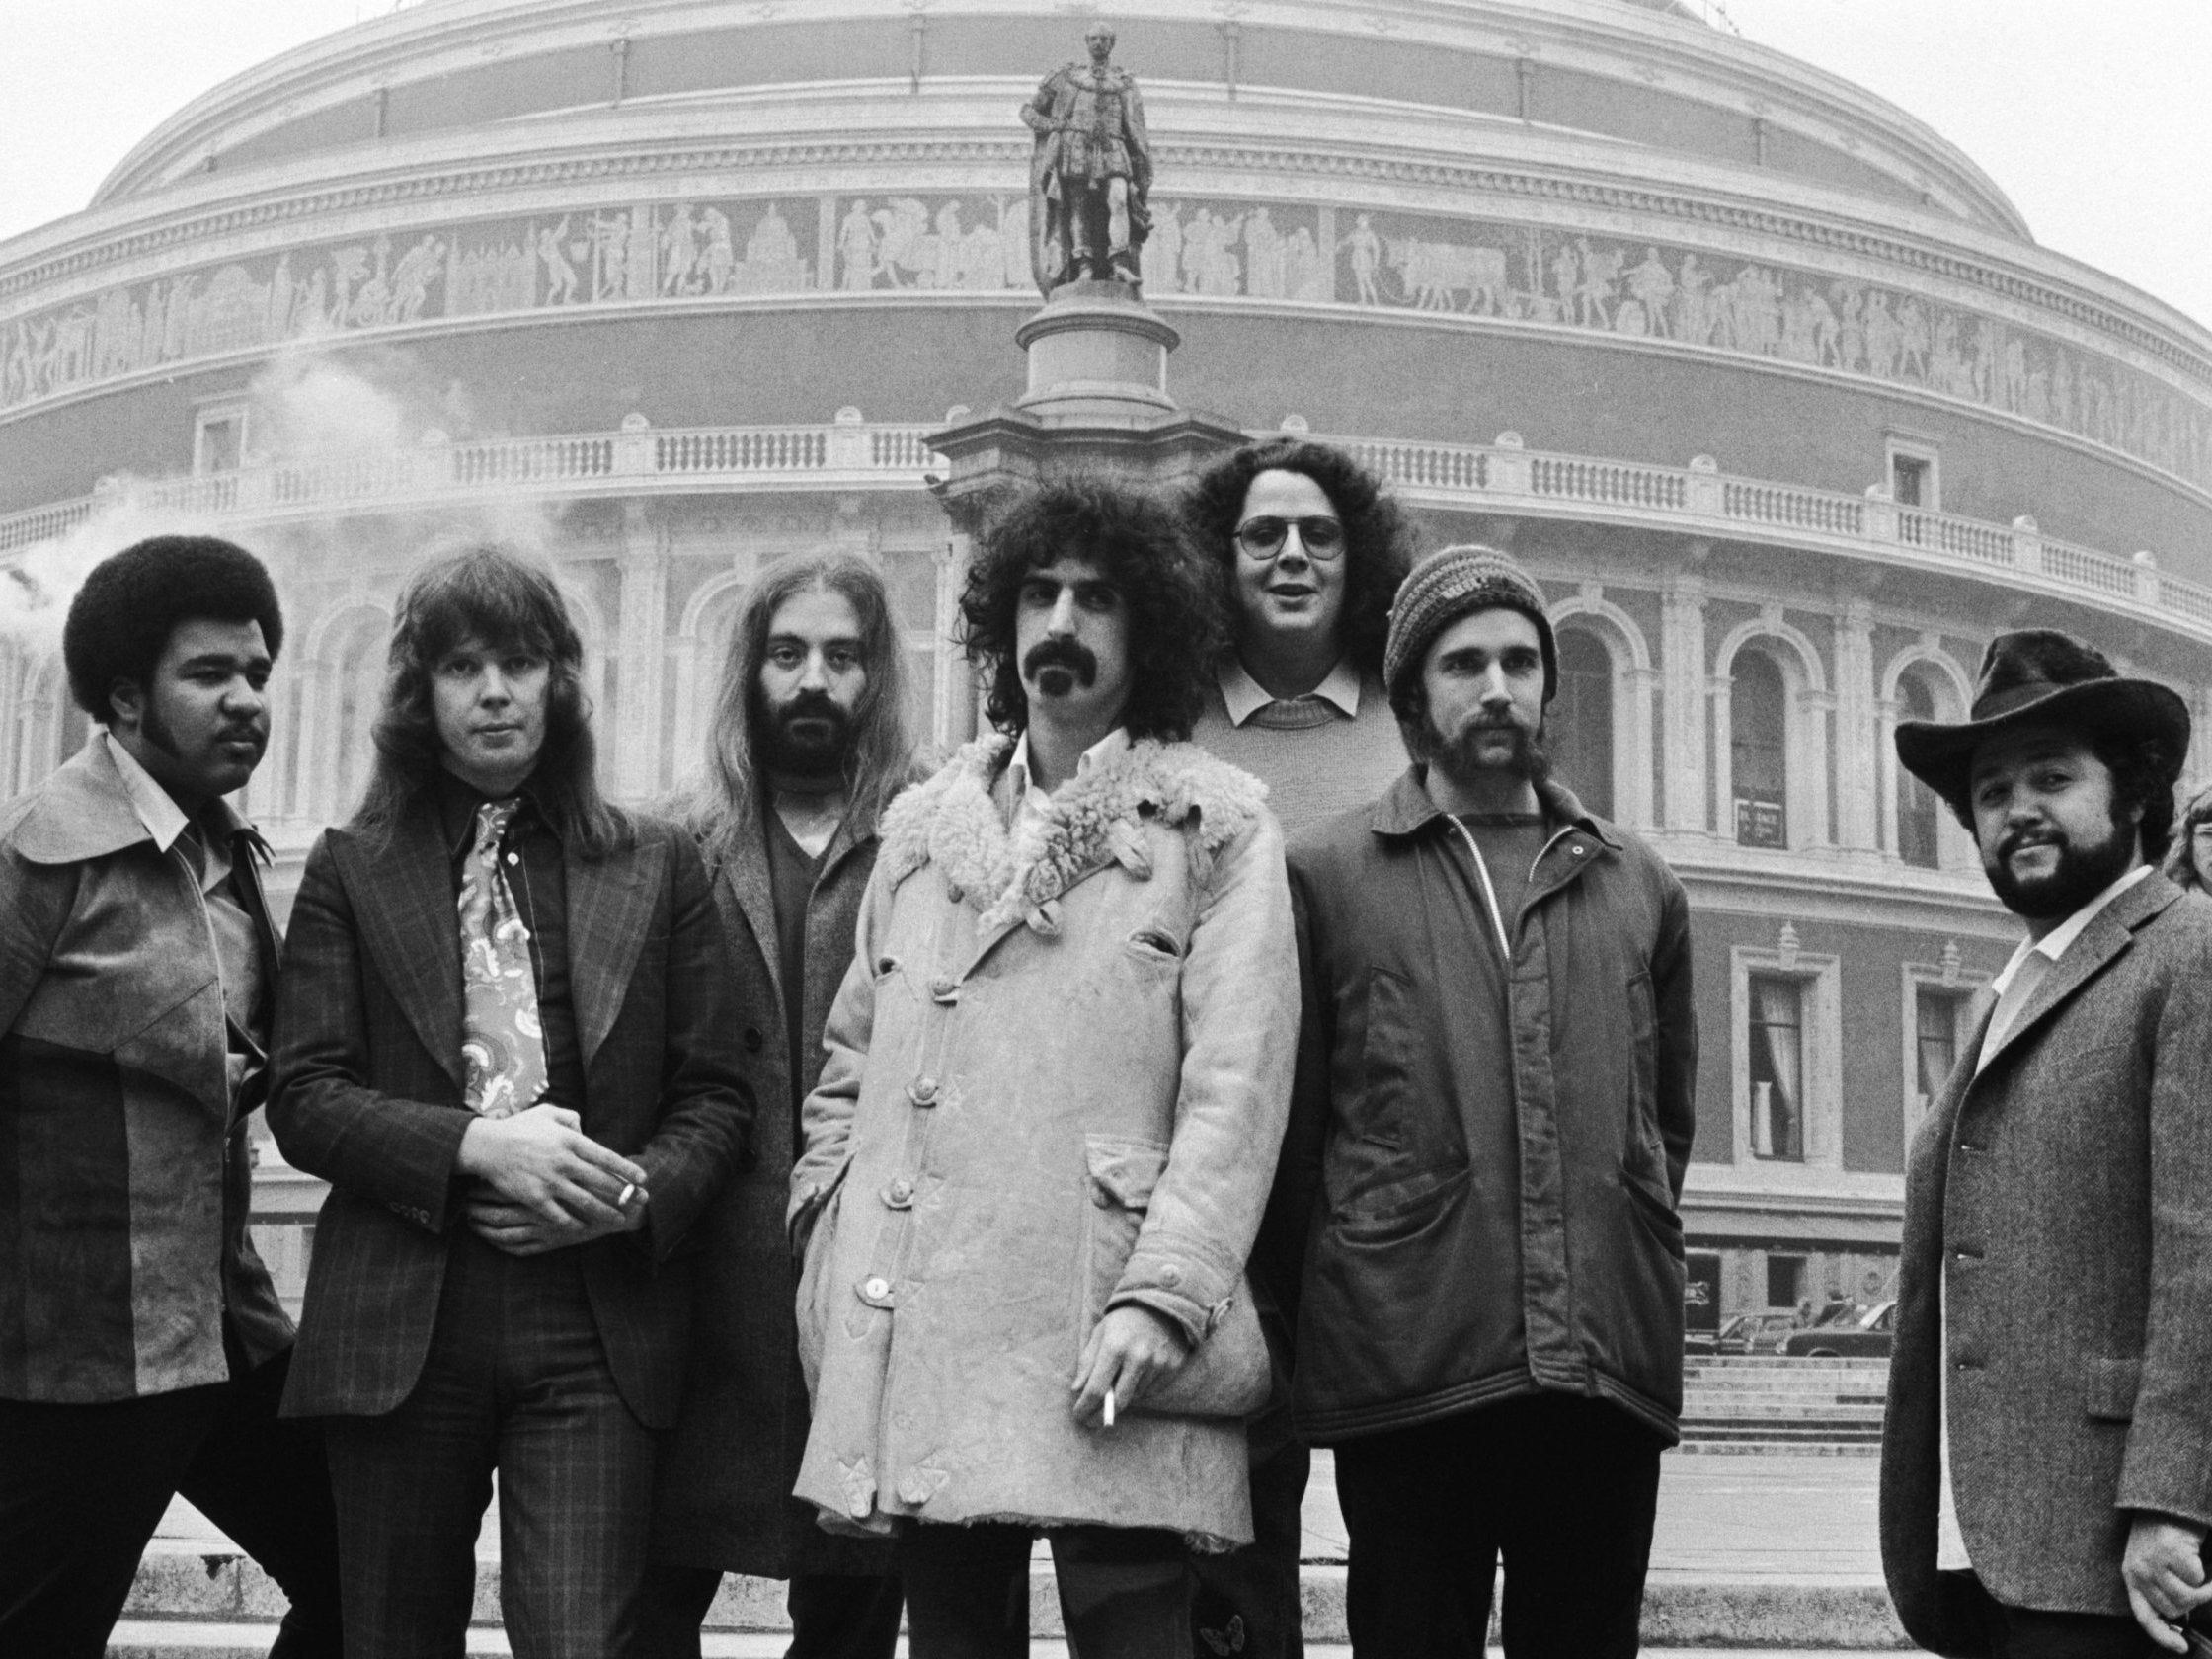 A Life in Focus: Frank Zappa, genre-defying musician who was the